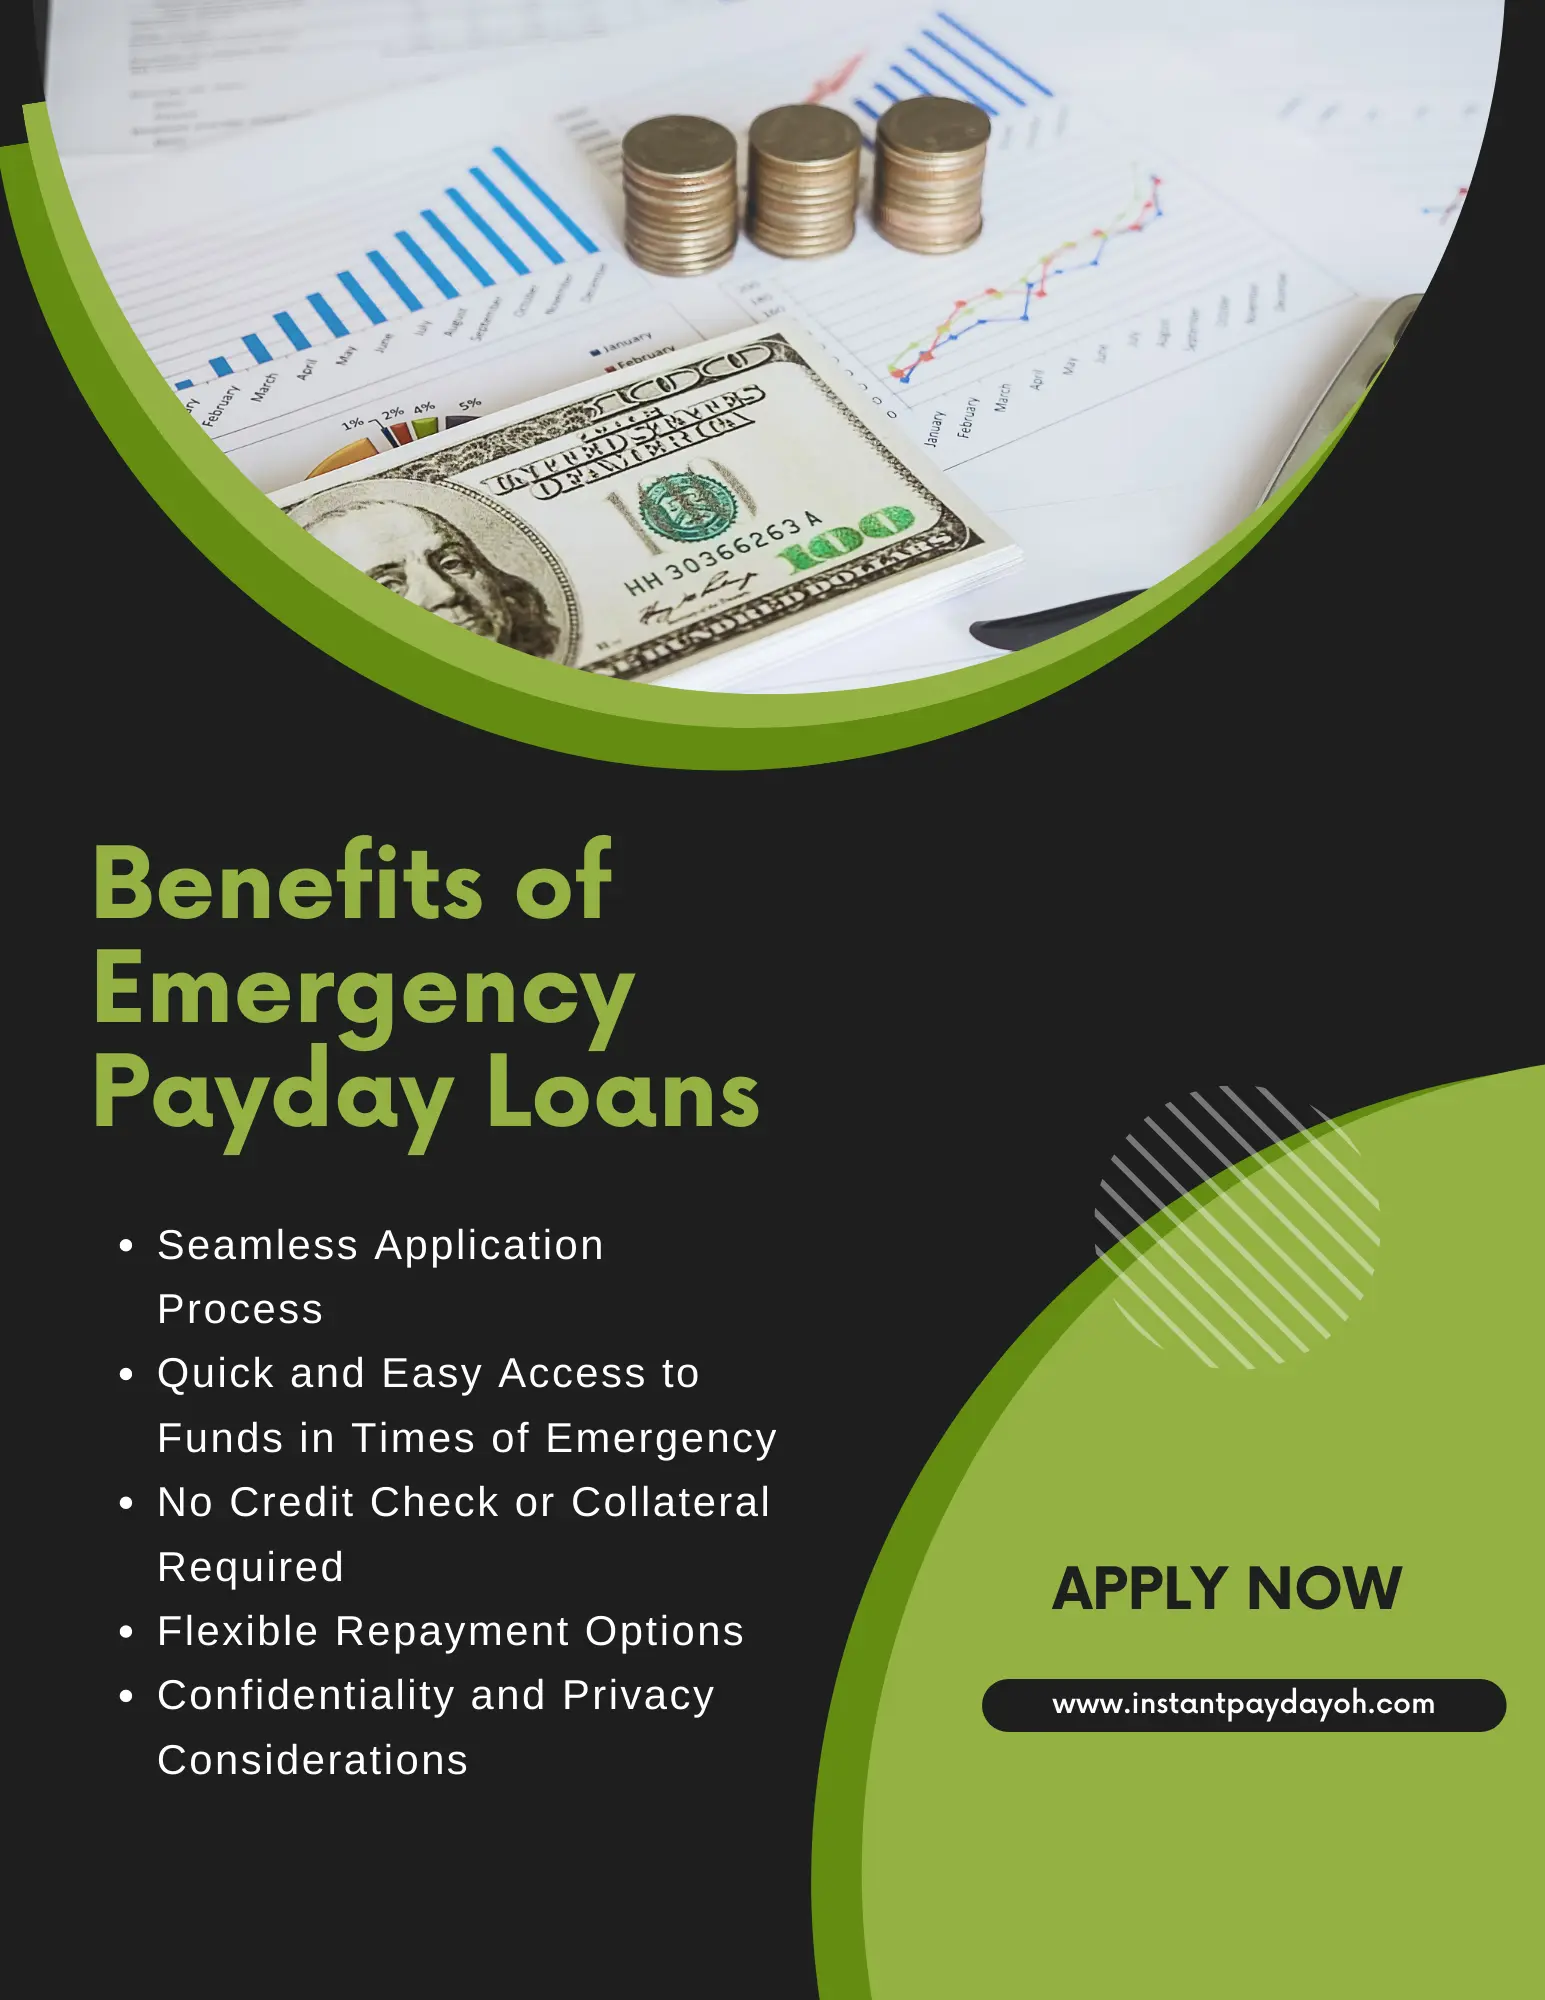 Benefits of Emergency Payday Loans